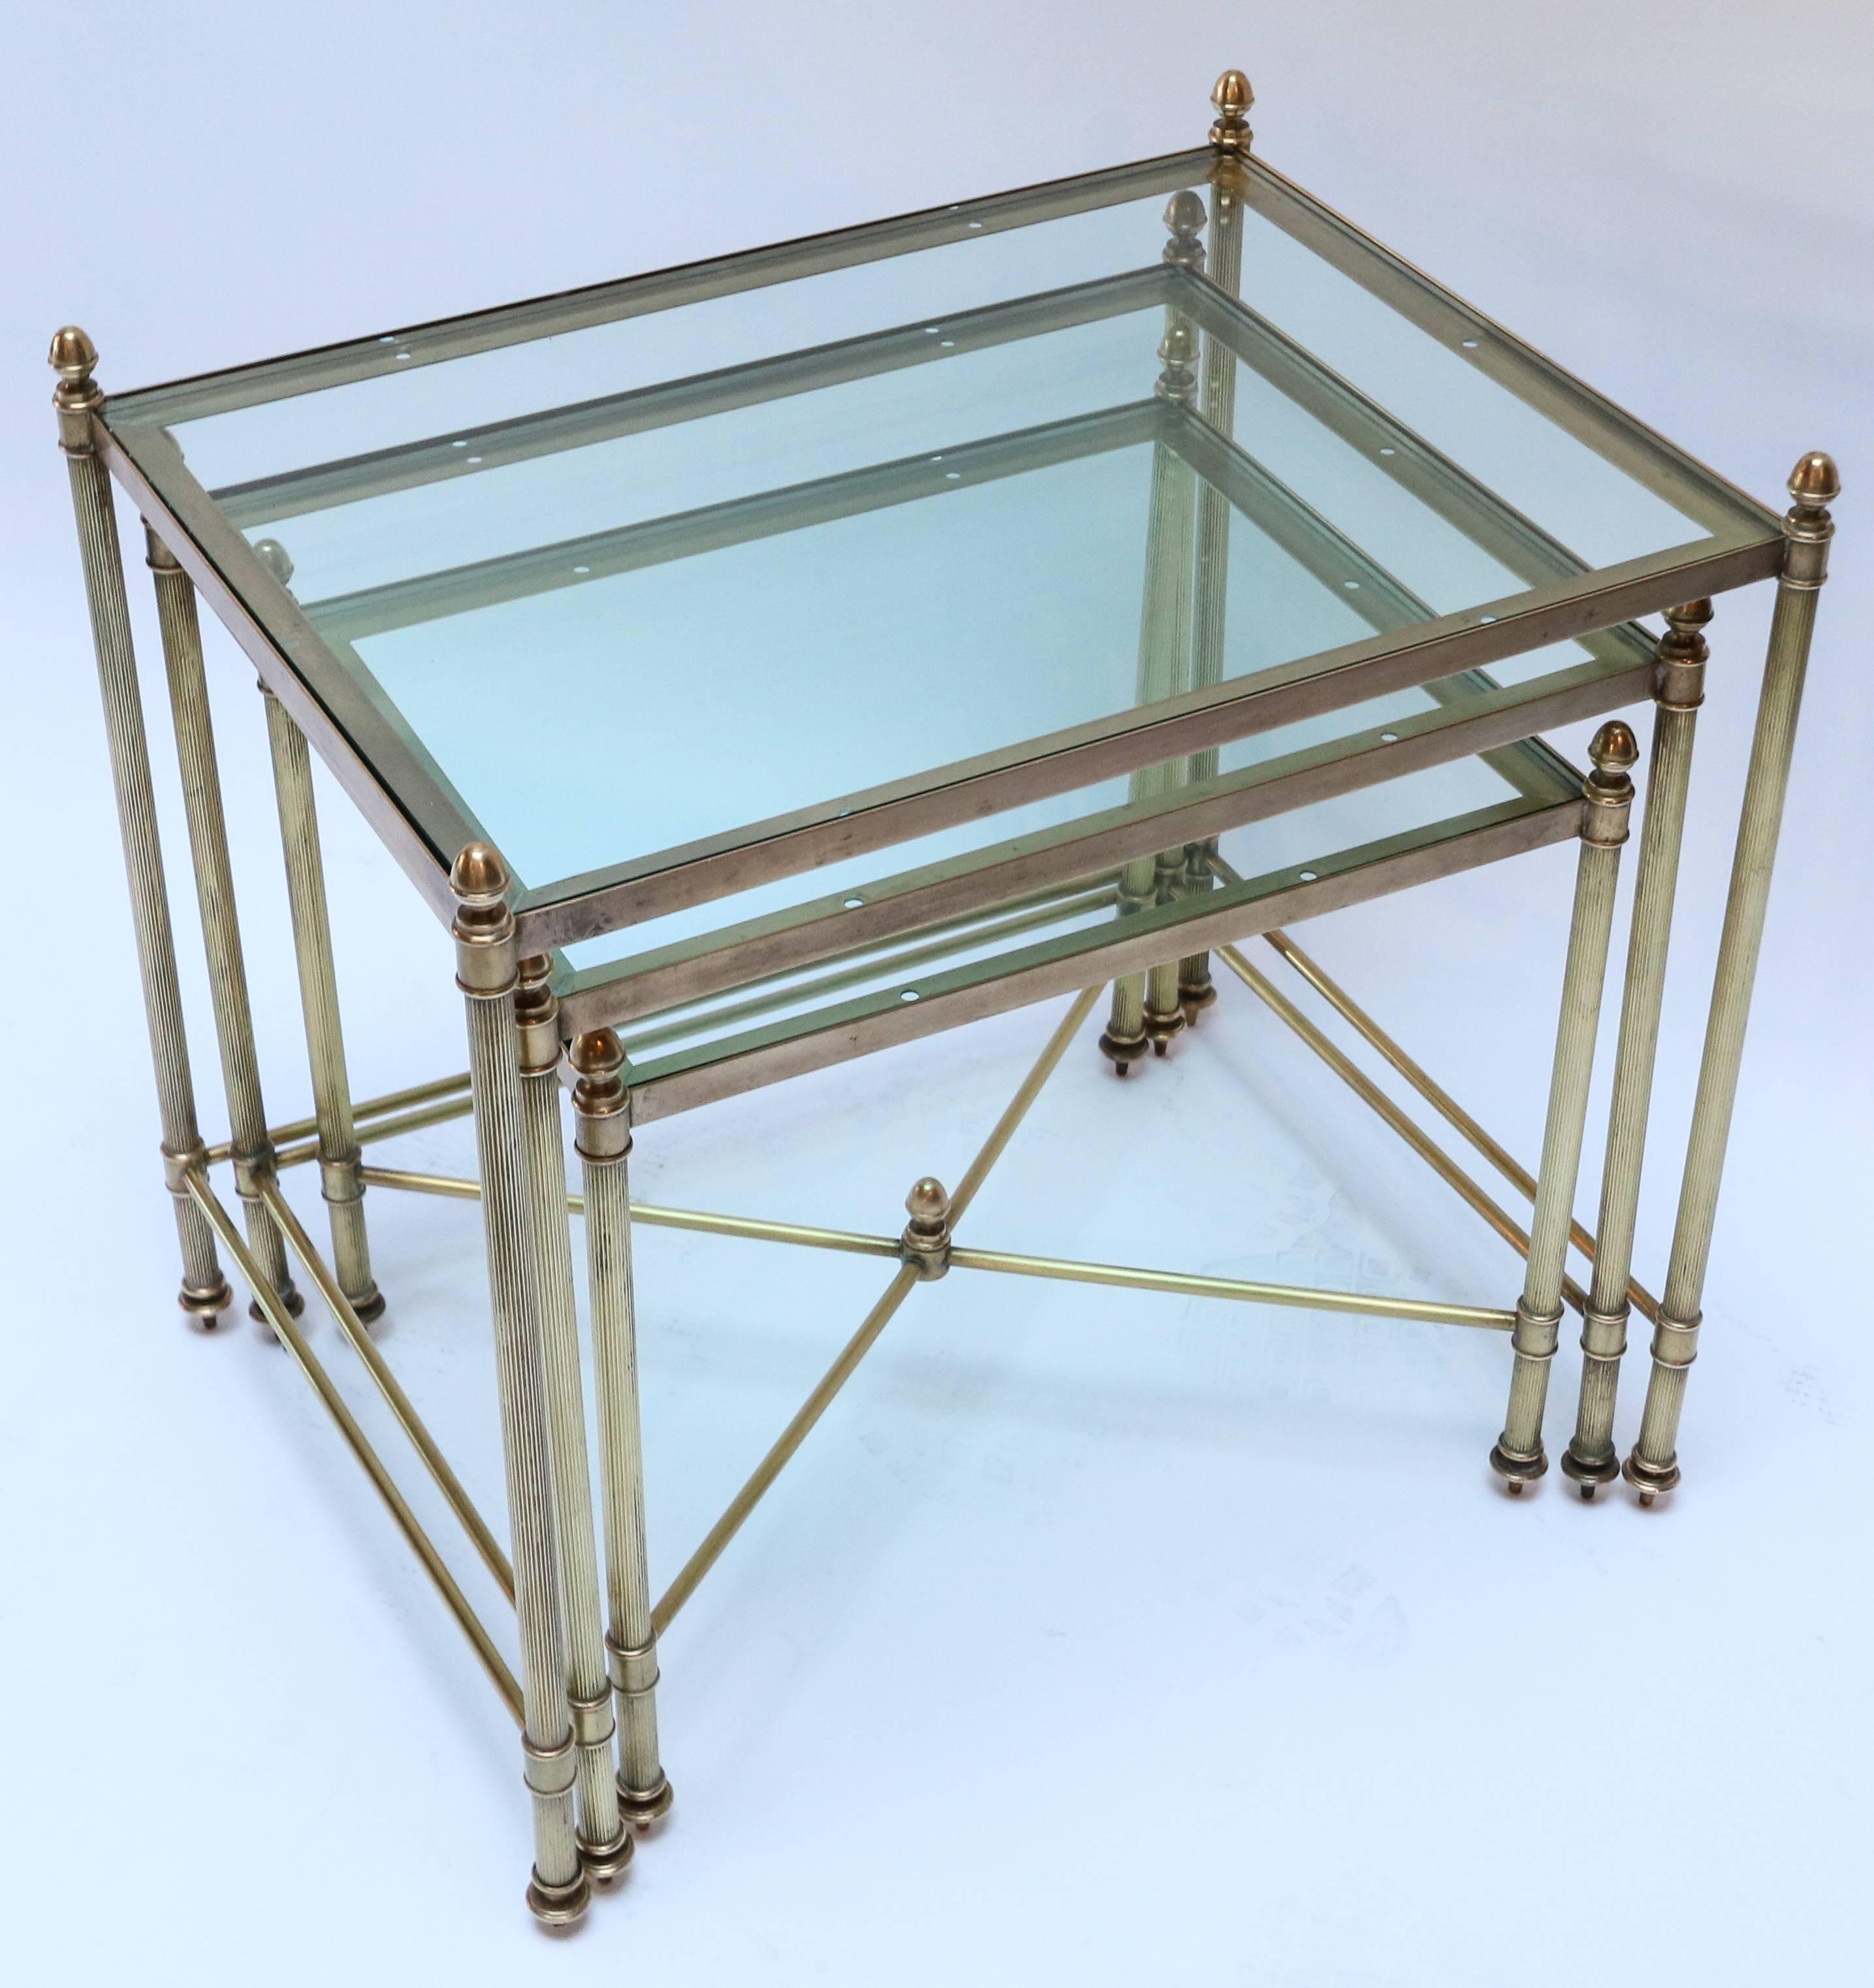 Set of three 1960s Italian brass nesting tables with finials and decorative details.

Measures: Large: 19in x 14in x 18.5in high
Medium: 17in x 13in x 16.5in high
Small: 115in x 112in x 14.5in high.